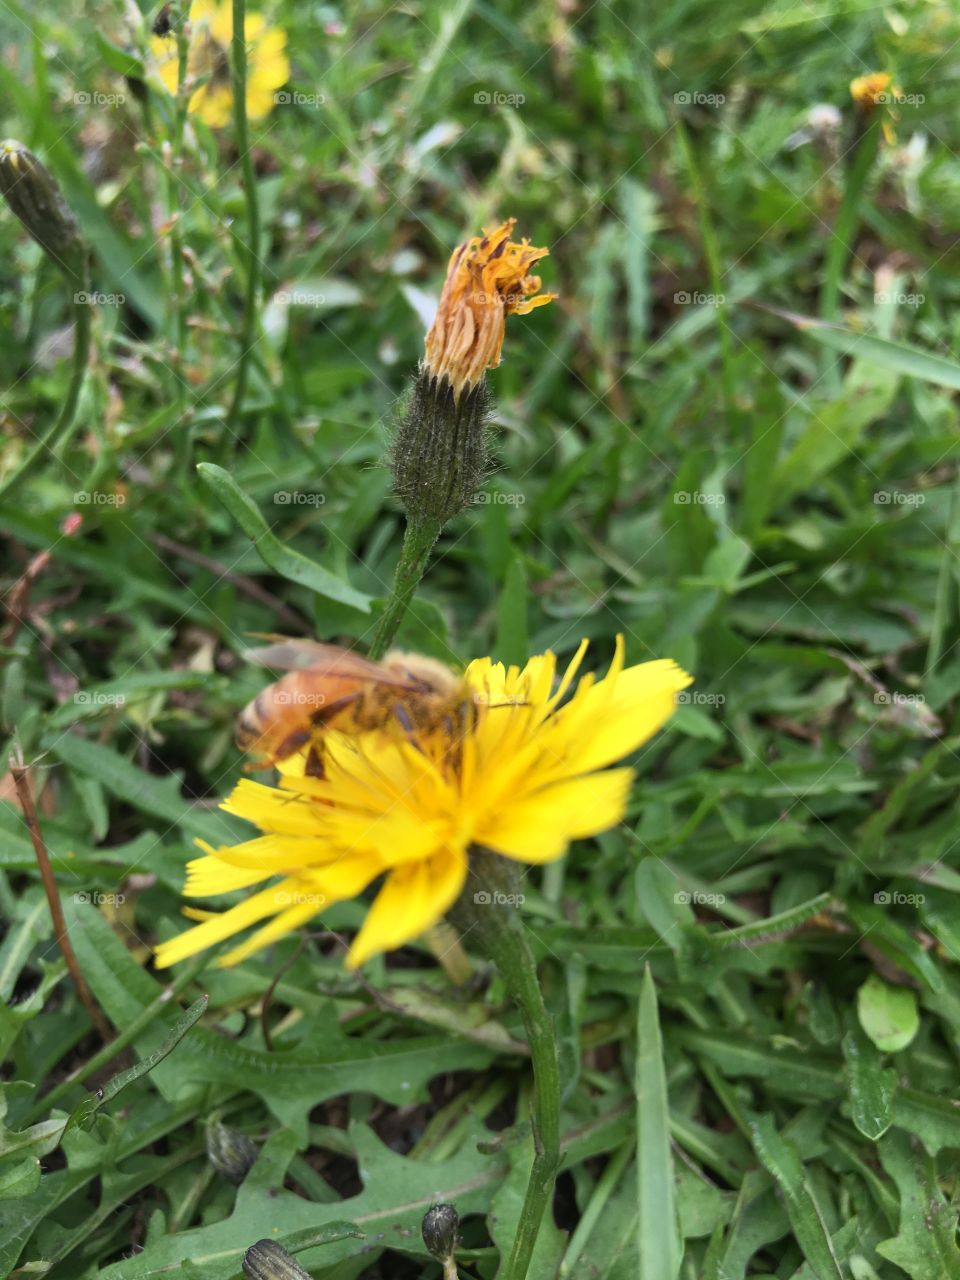 Bee trying to get pollen from the dandelion